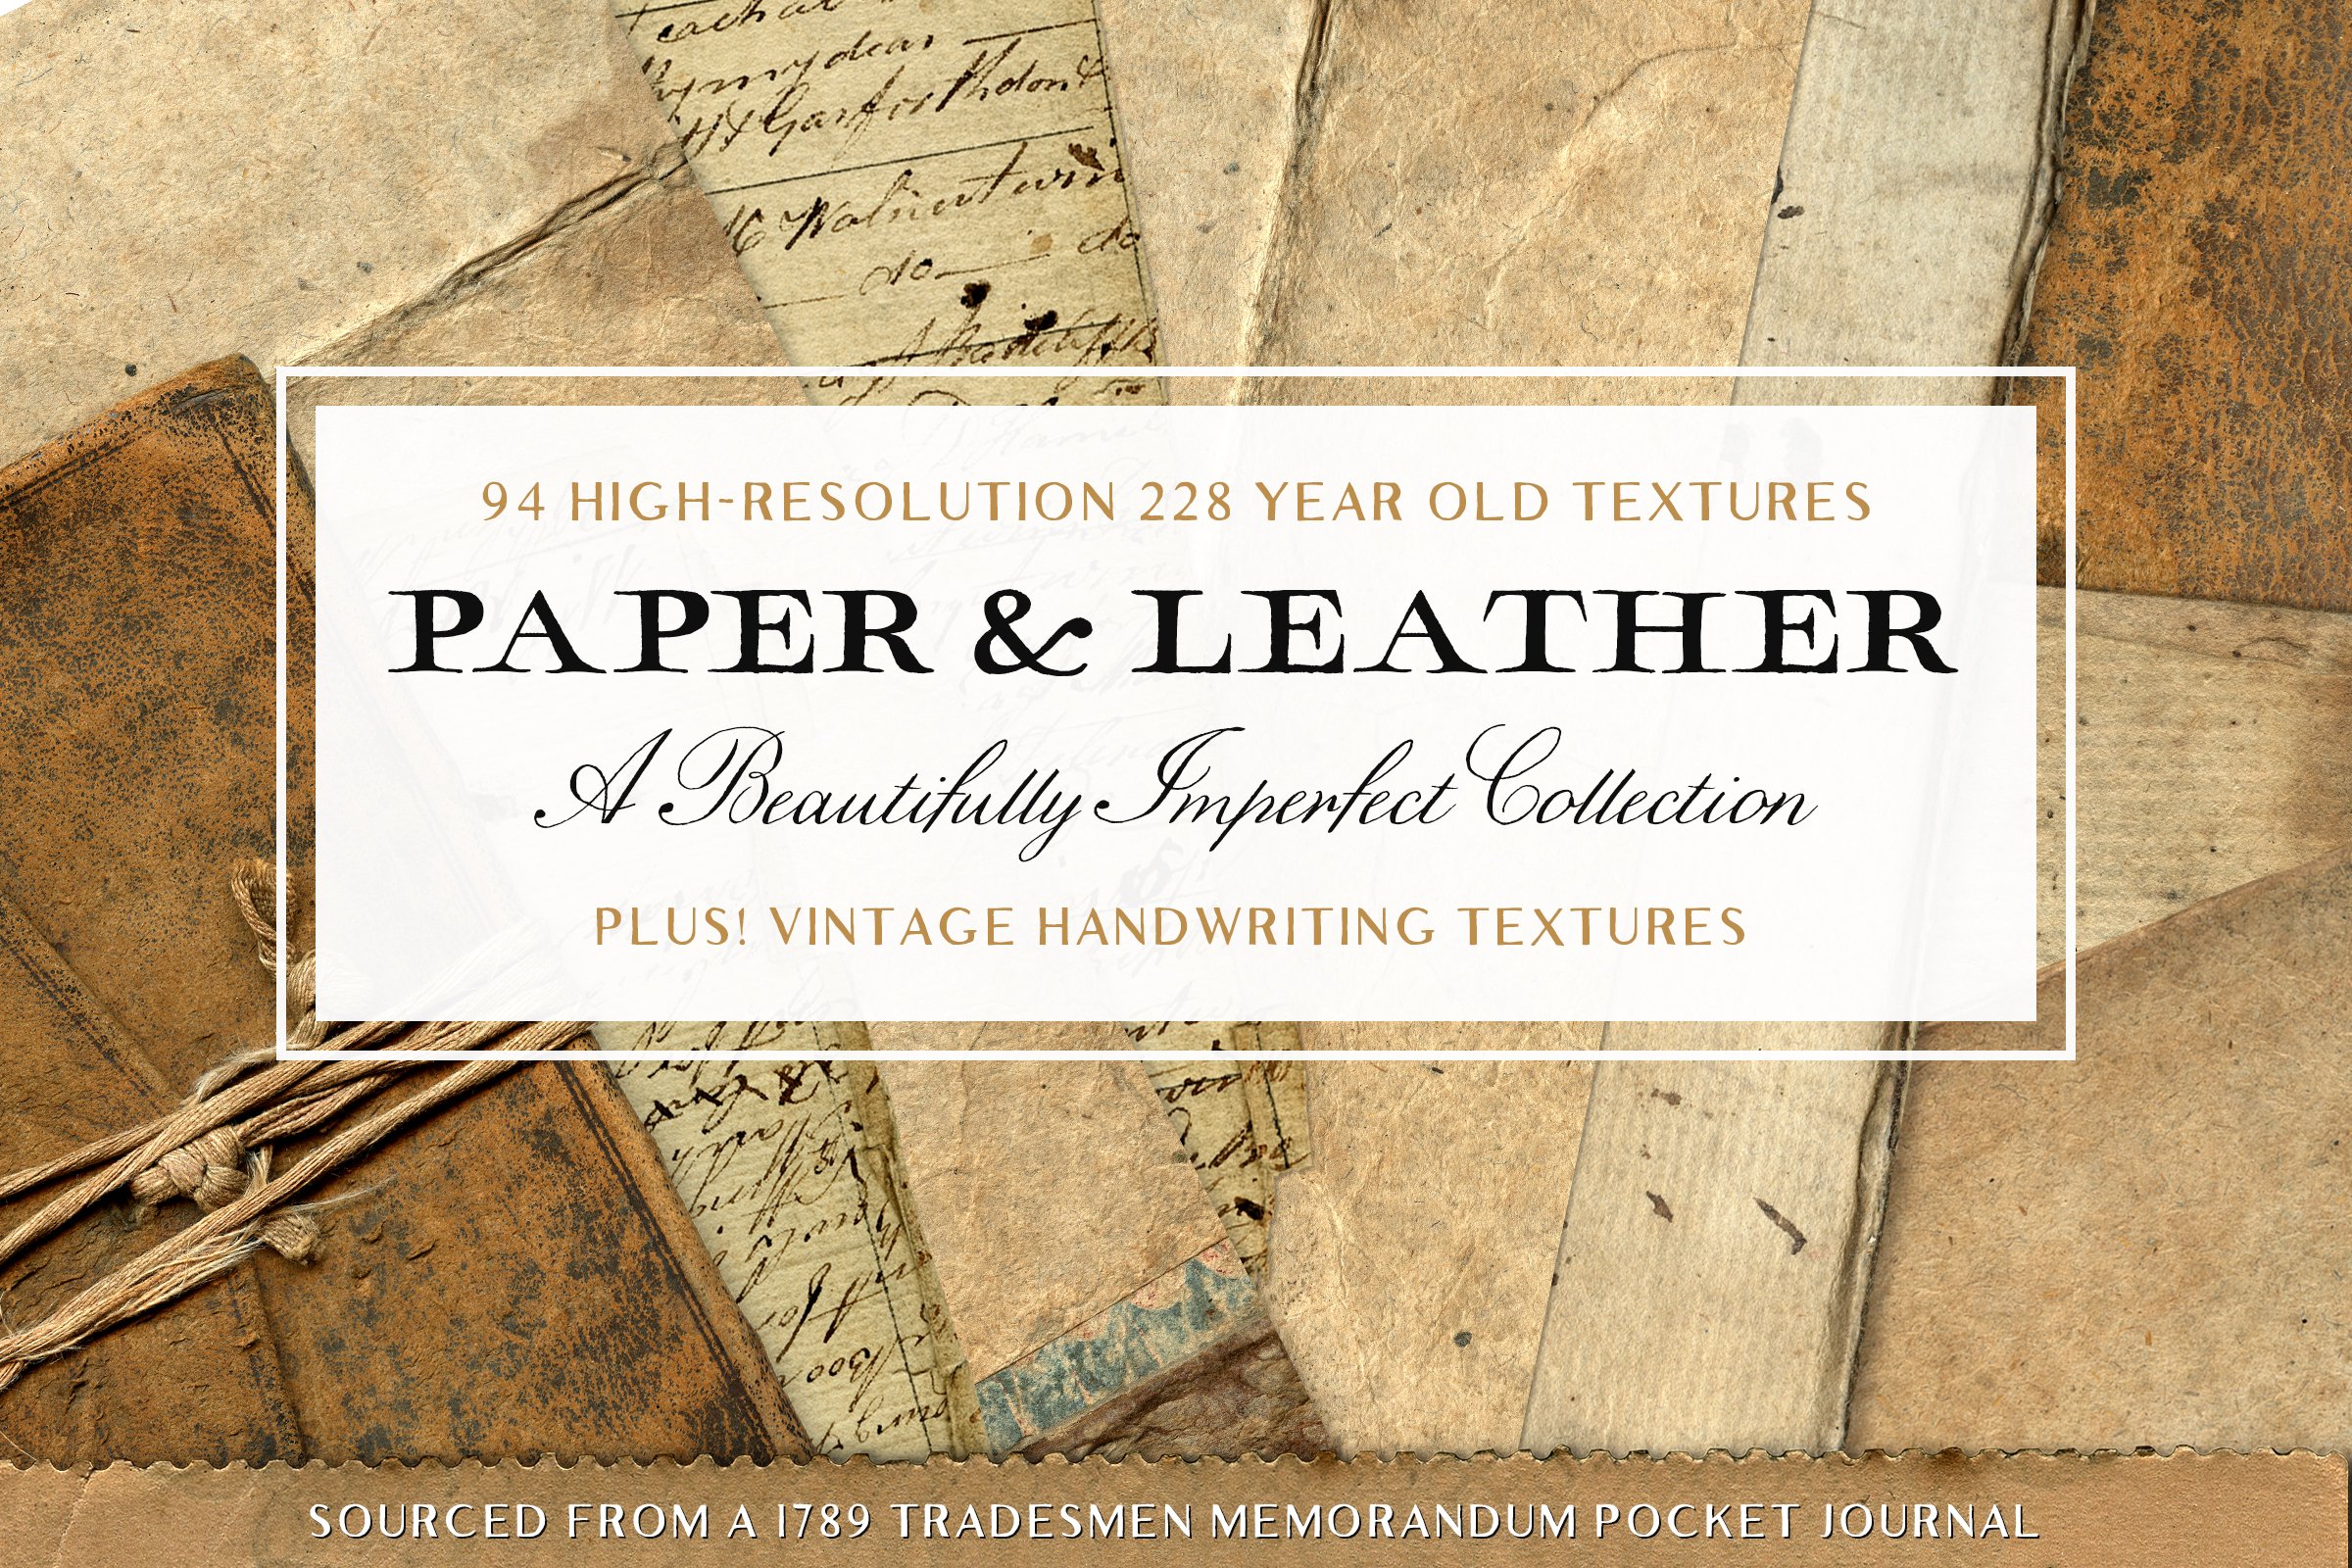 94 Vintage Leather & Paper Textures cover image.